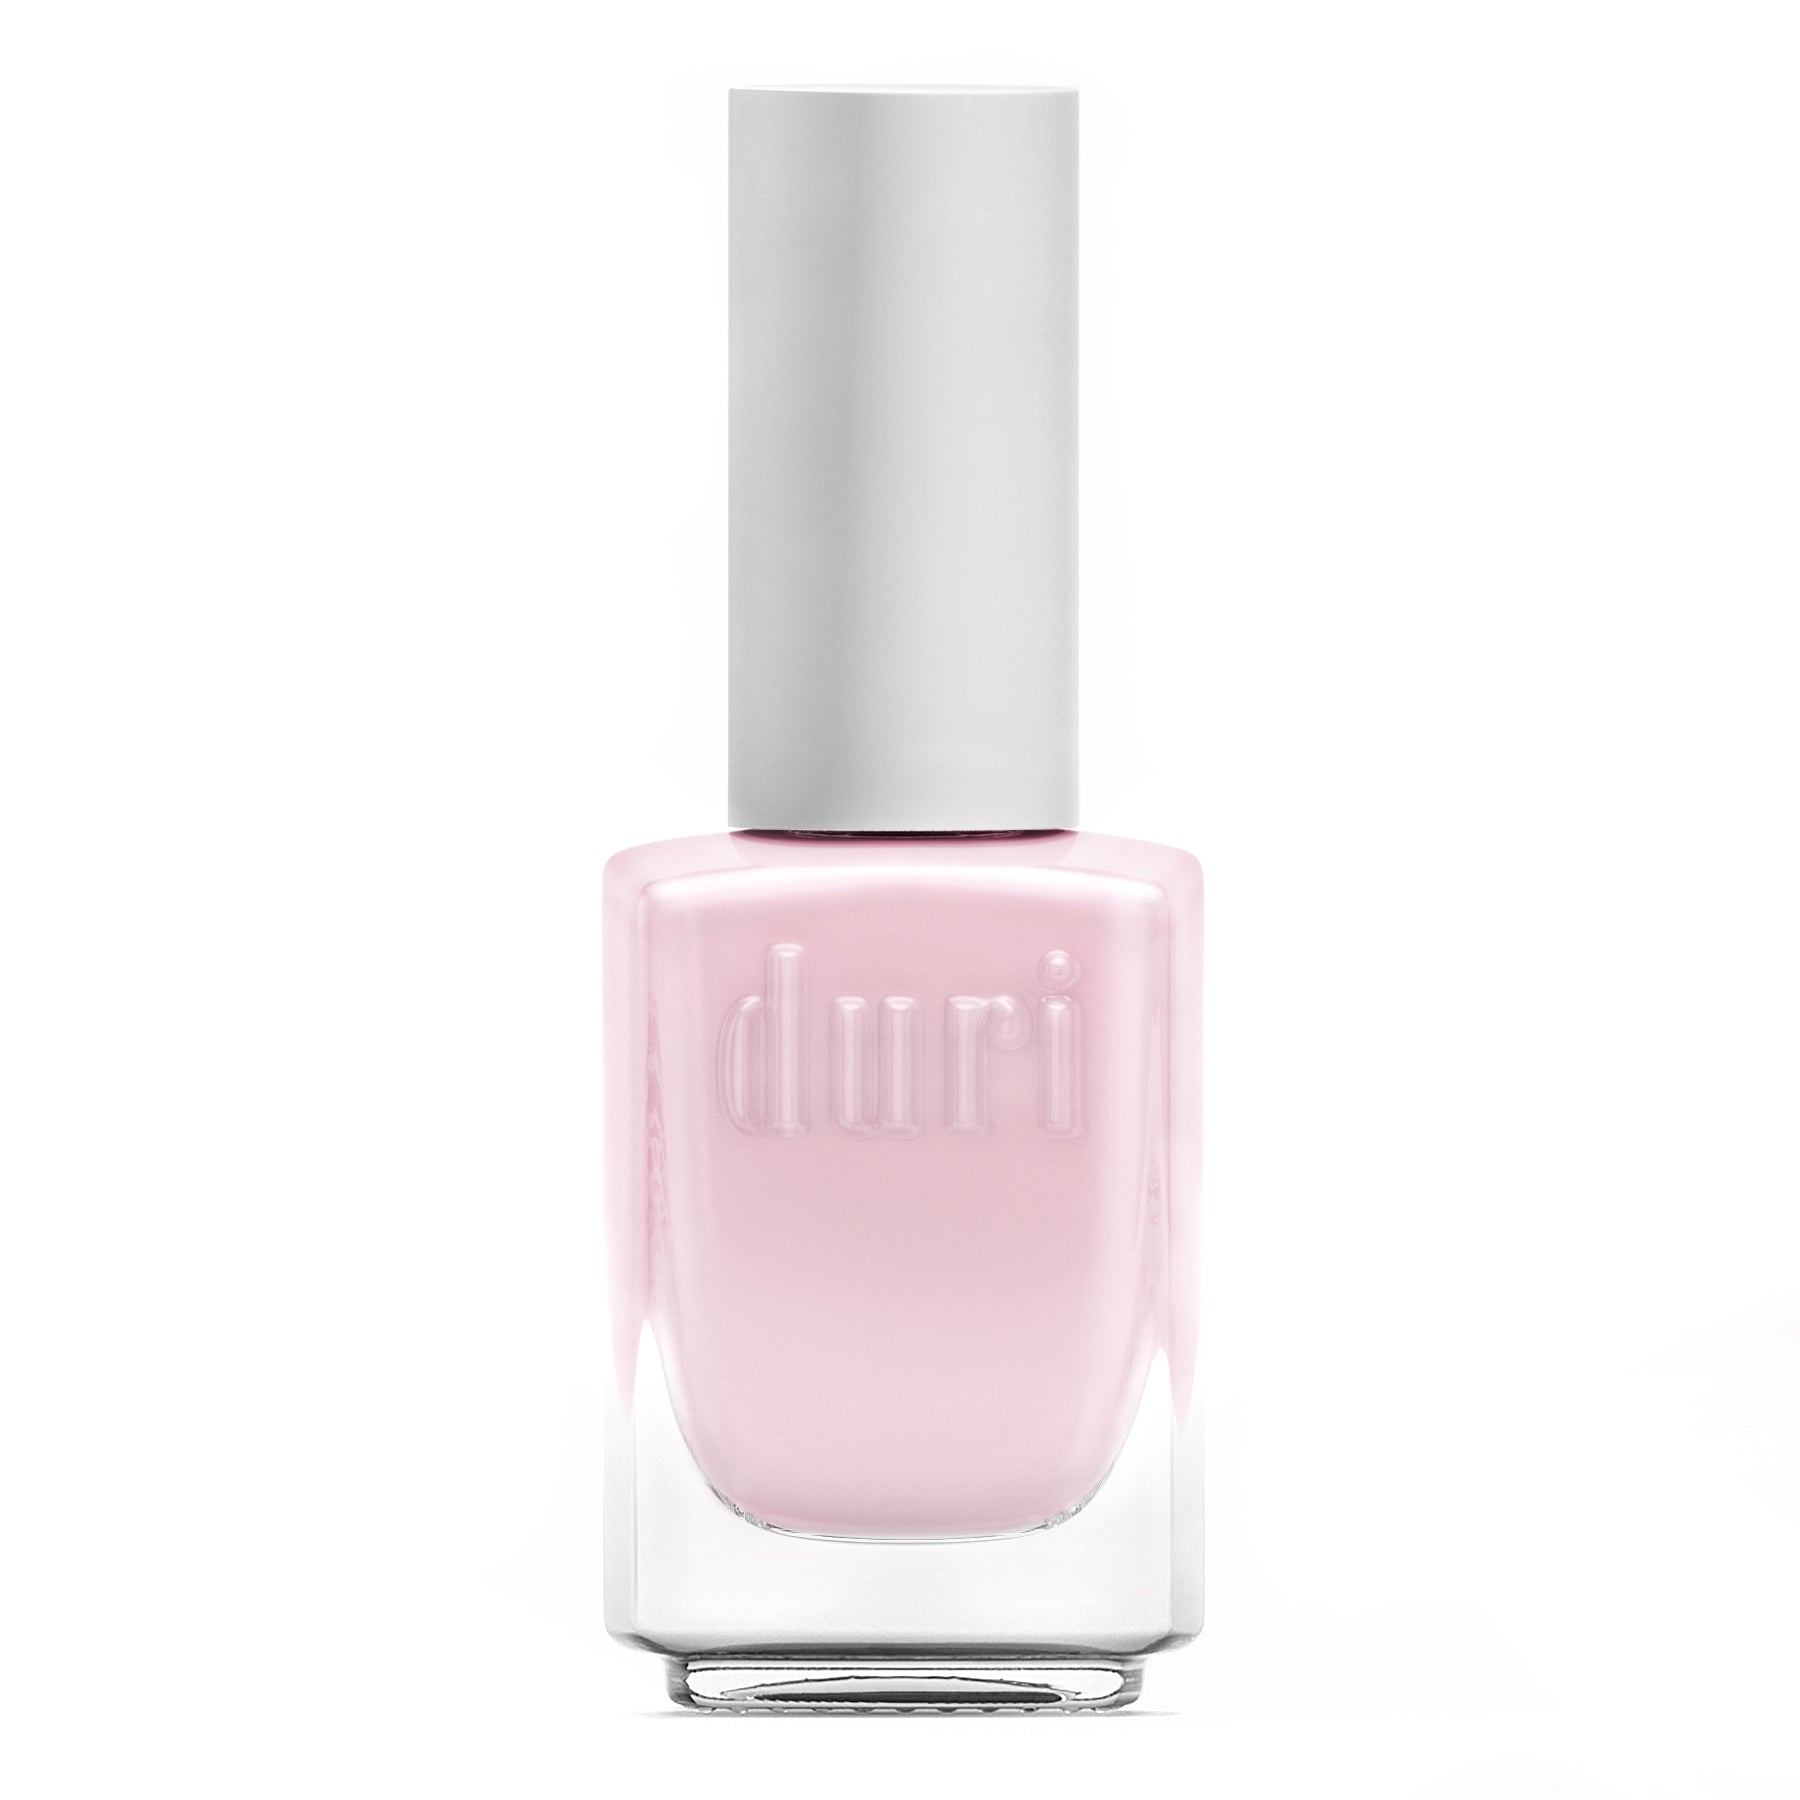 MI Fashion High Shine Long Wearing Nail Polish Paint Combo 15ml each Pink,  Red, Pastel Pink and Light Pink : Amazon.in: Beauty